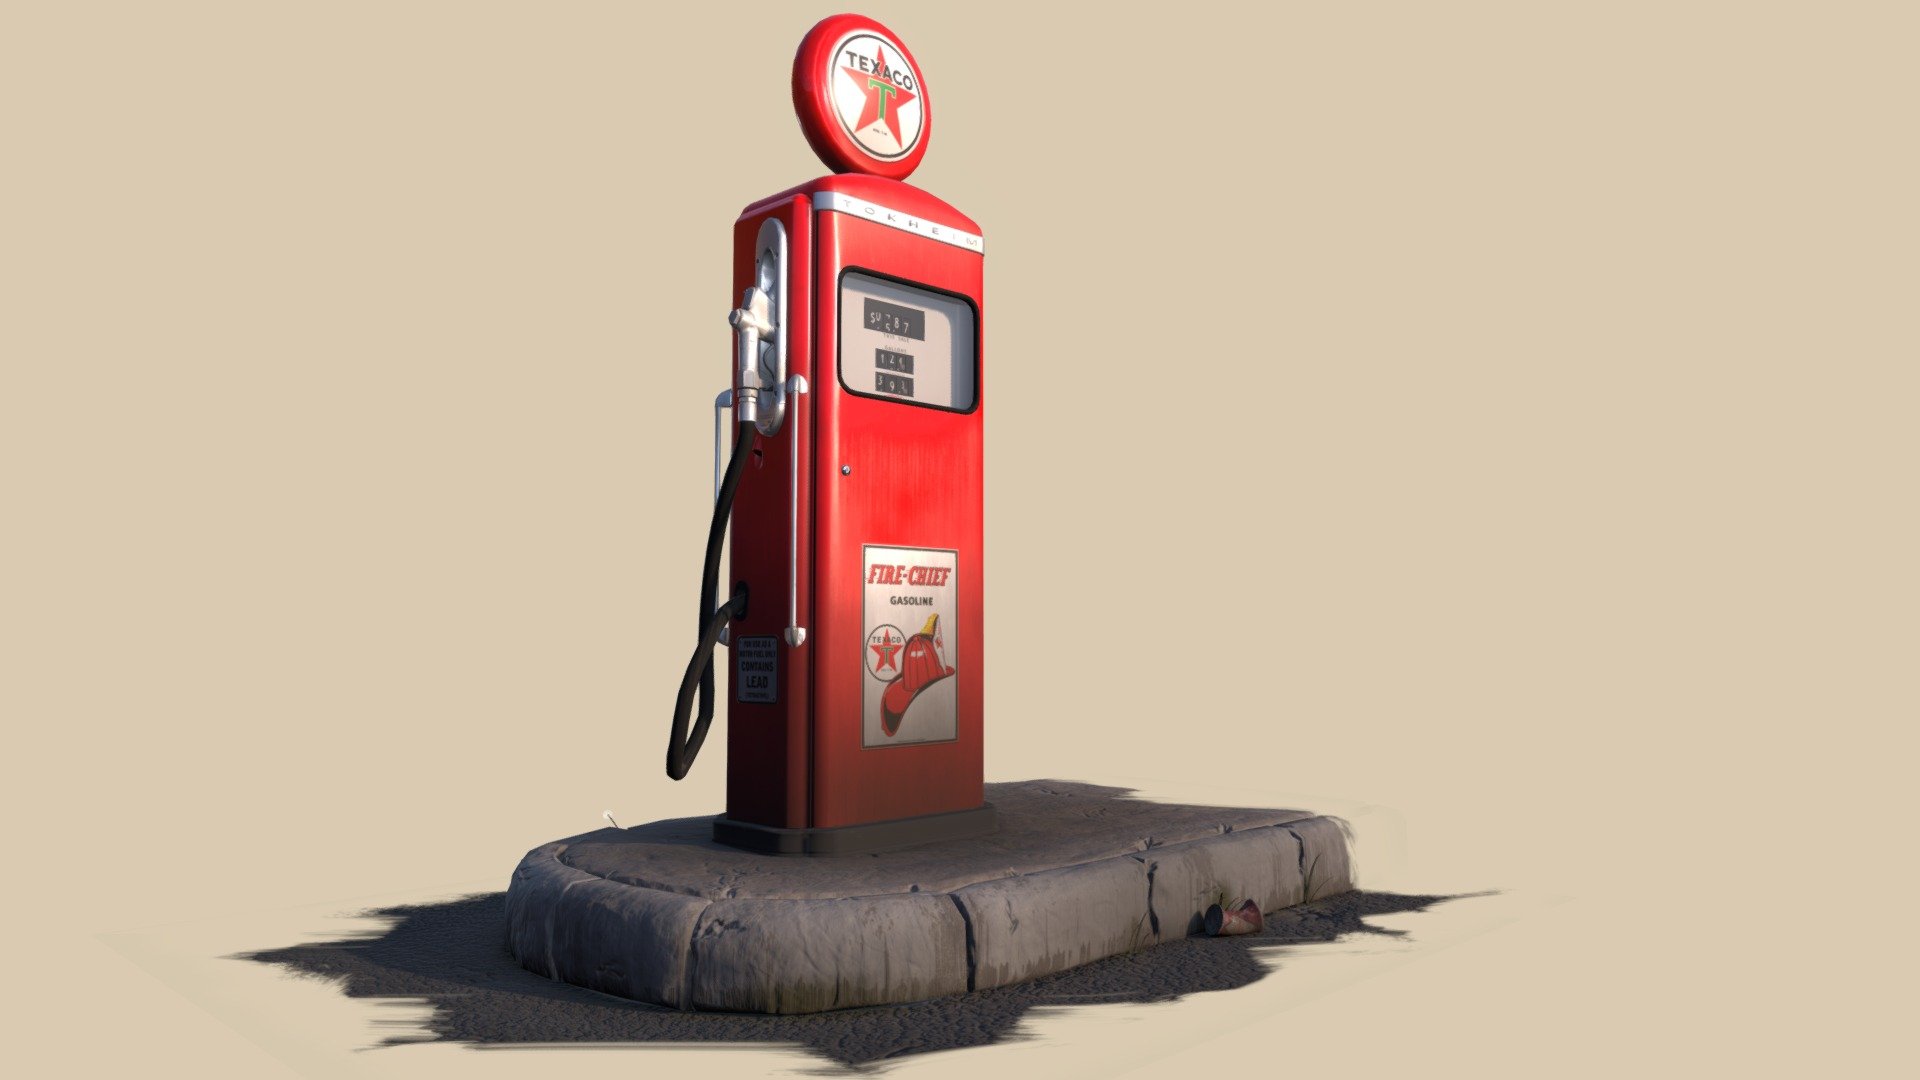 A 60' Texaco Gas Station (clean Version -&gt; https://sketchfab.com/models/8274670b568c40afa770f4bc9fce7d0c)

The Numbers can be changed with a shader using Vertex color.

Scenery inspired By Simon Loyer artwork (https://www.artstation.com/artwork/DyGy9)

Software used:
Maya, Substance Painter, Zbrush, 3DCoat, Xnormal 3d model